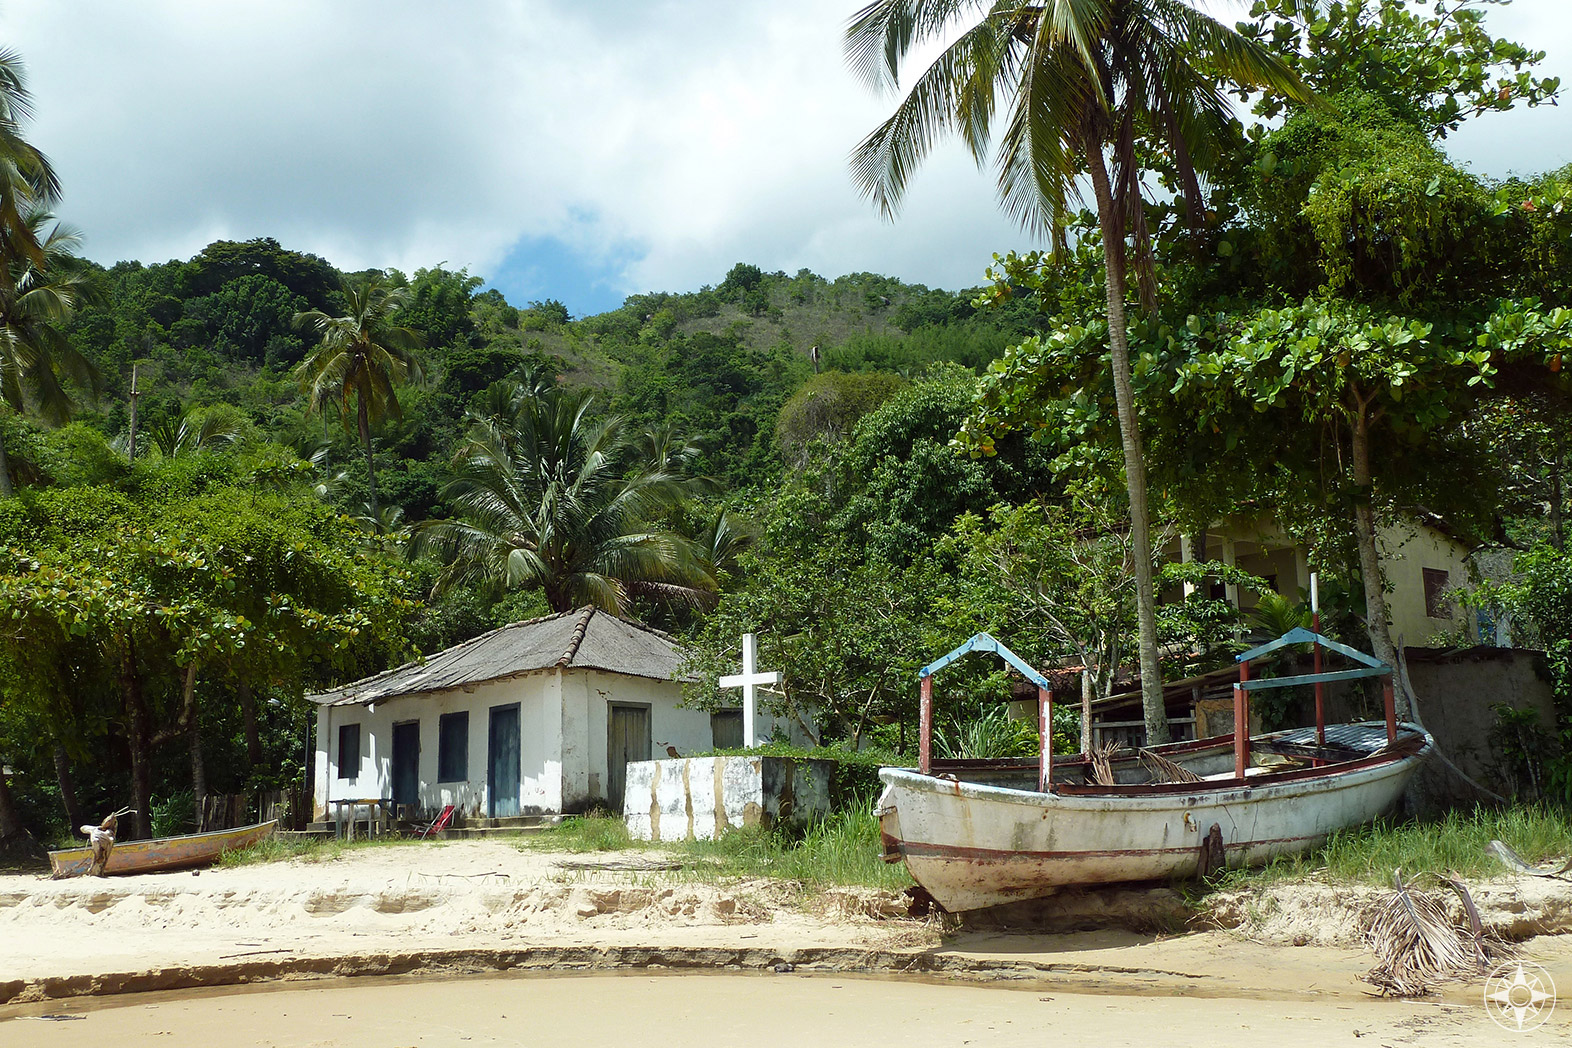 House, cross, boat on a beach - things you find along the jungle-and-beach trail between Vila do Abraão and famous Lopes Mendes beach. HappierPlace